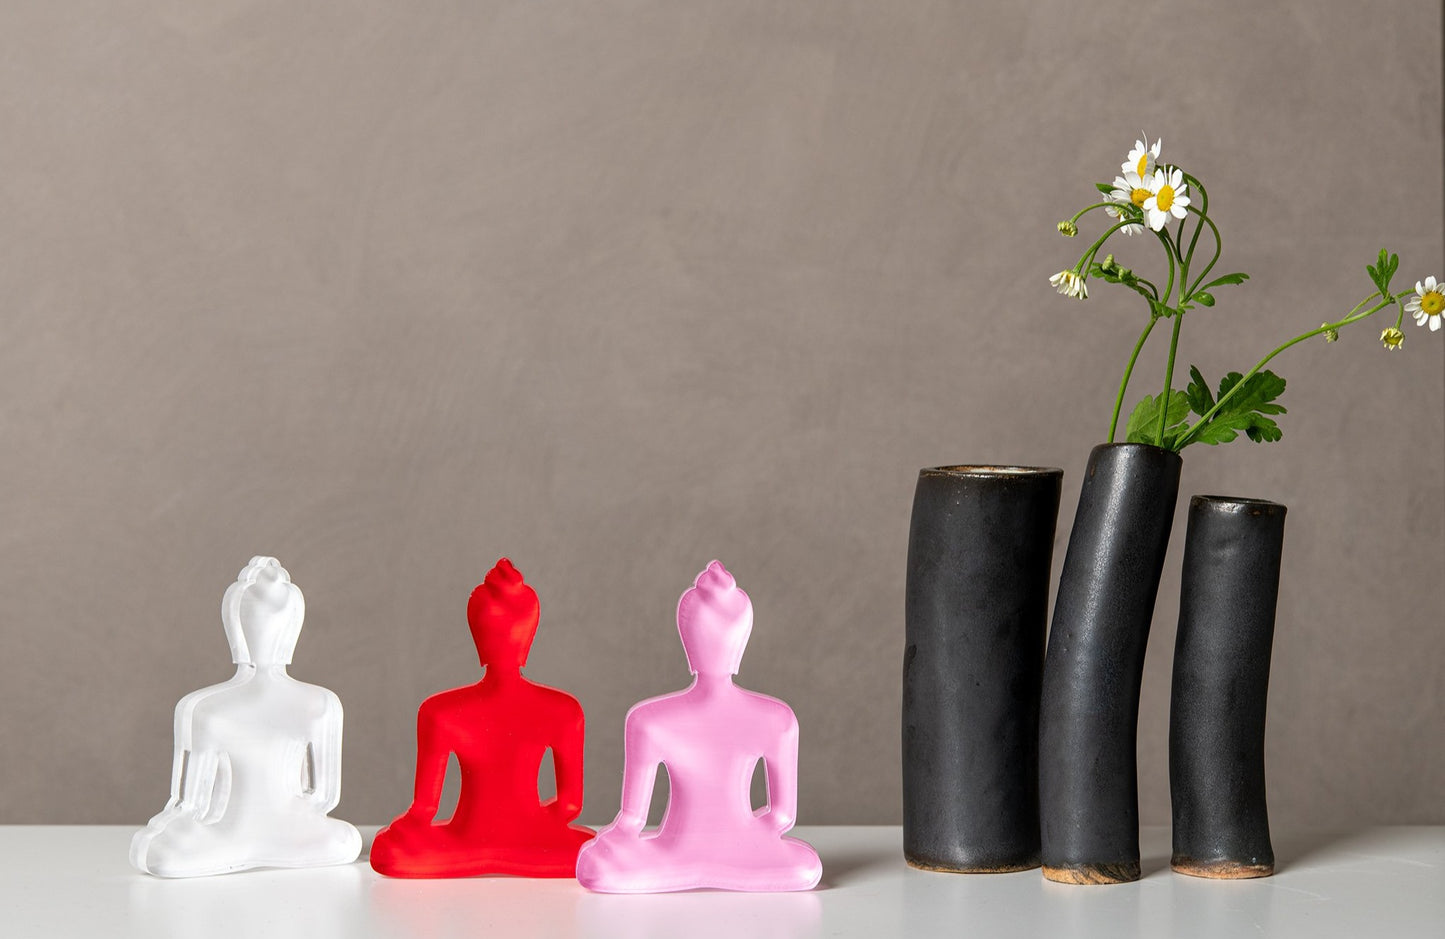 Buddha statue set of 3 - White, Red and Pink